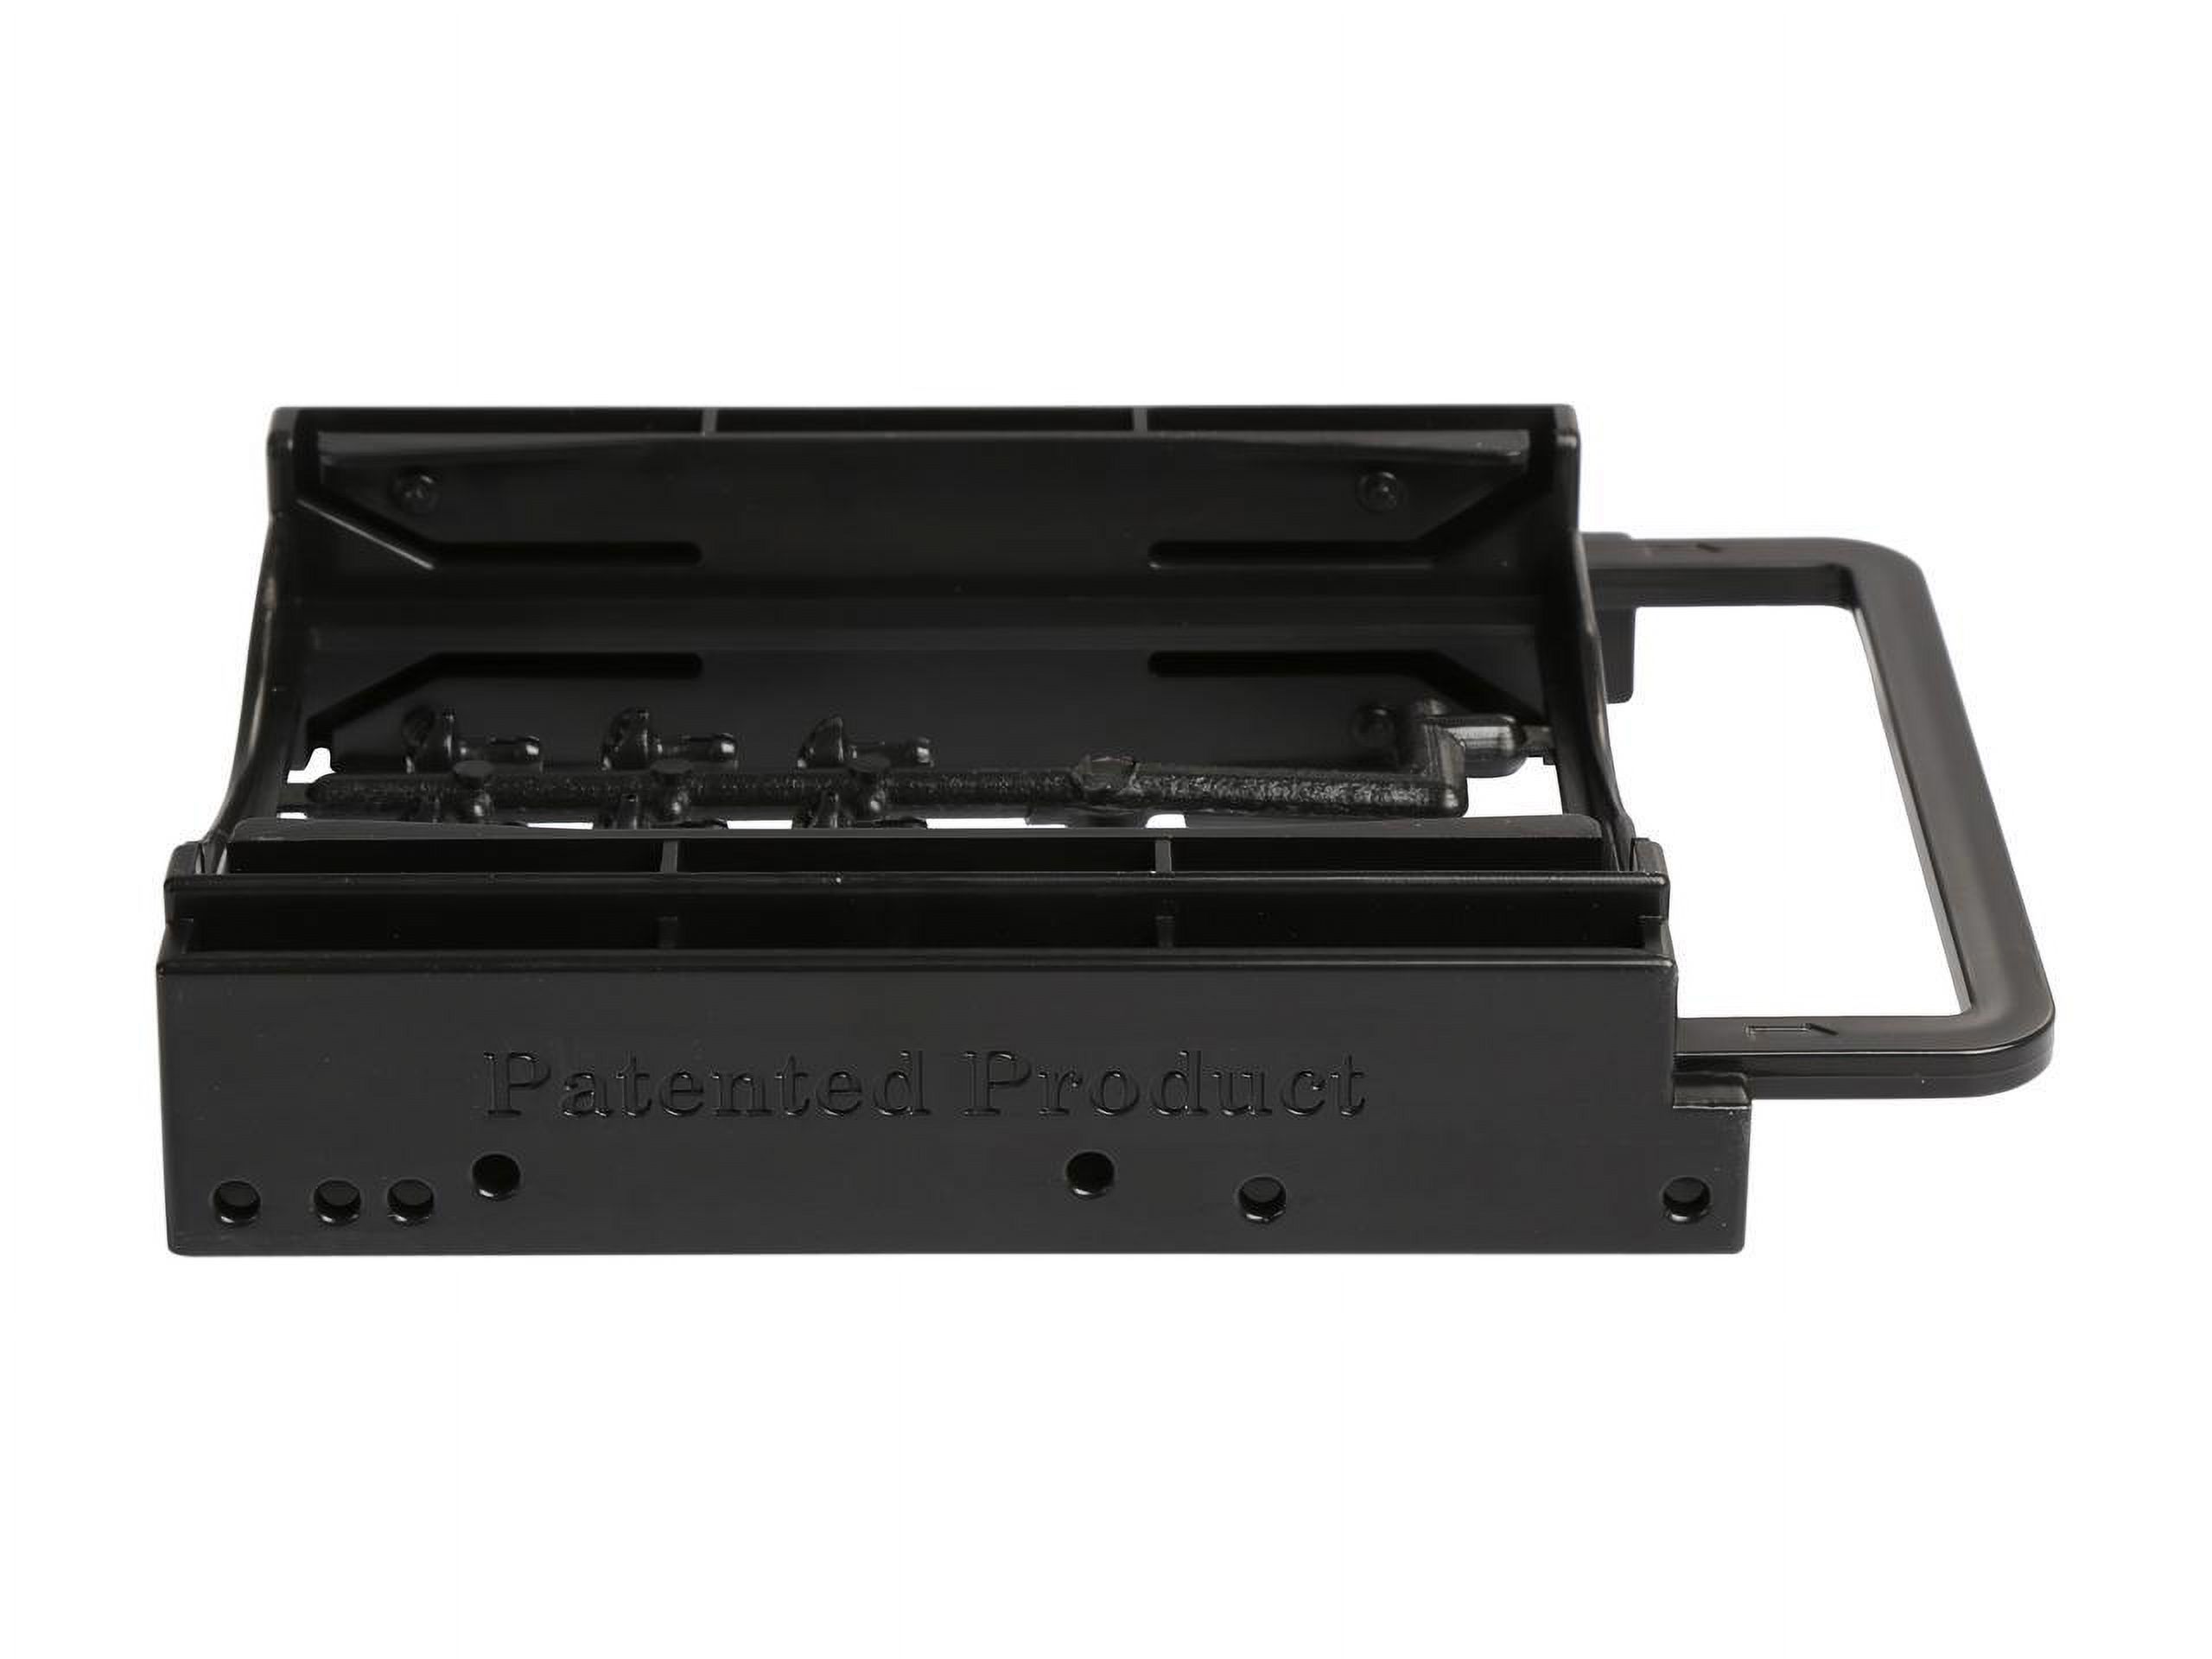 BRACKET225PT Dual 2.5in SSD/HDD Mounting Bracket for 3.5in Drive Bay - image 5 of 7